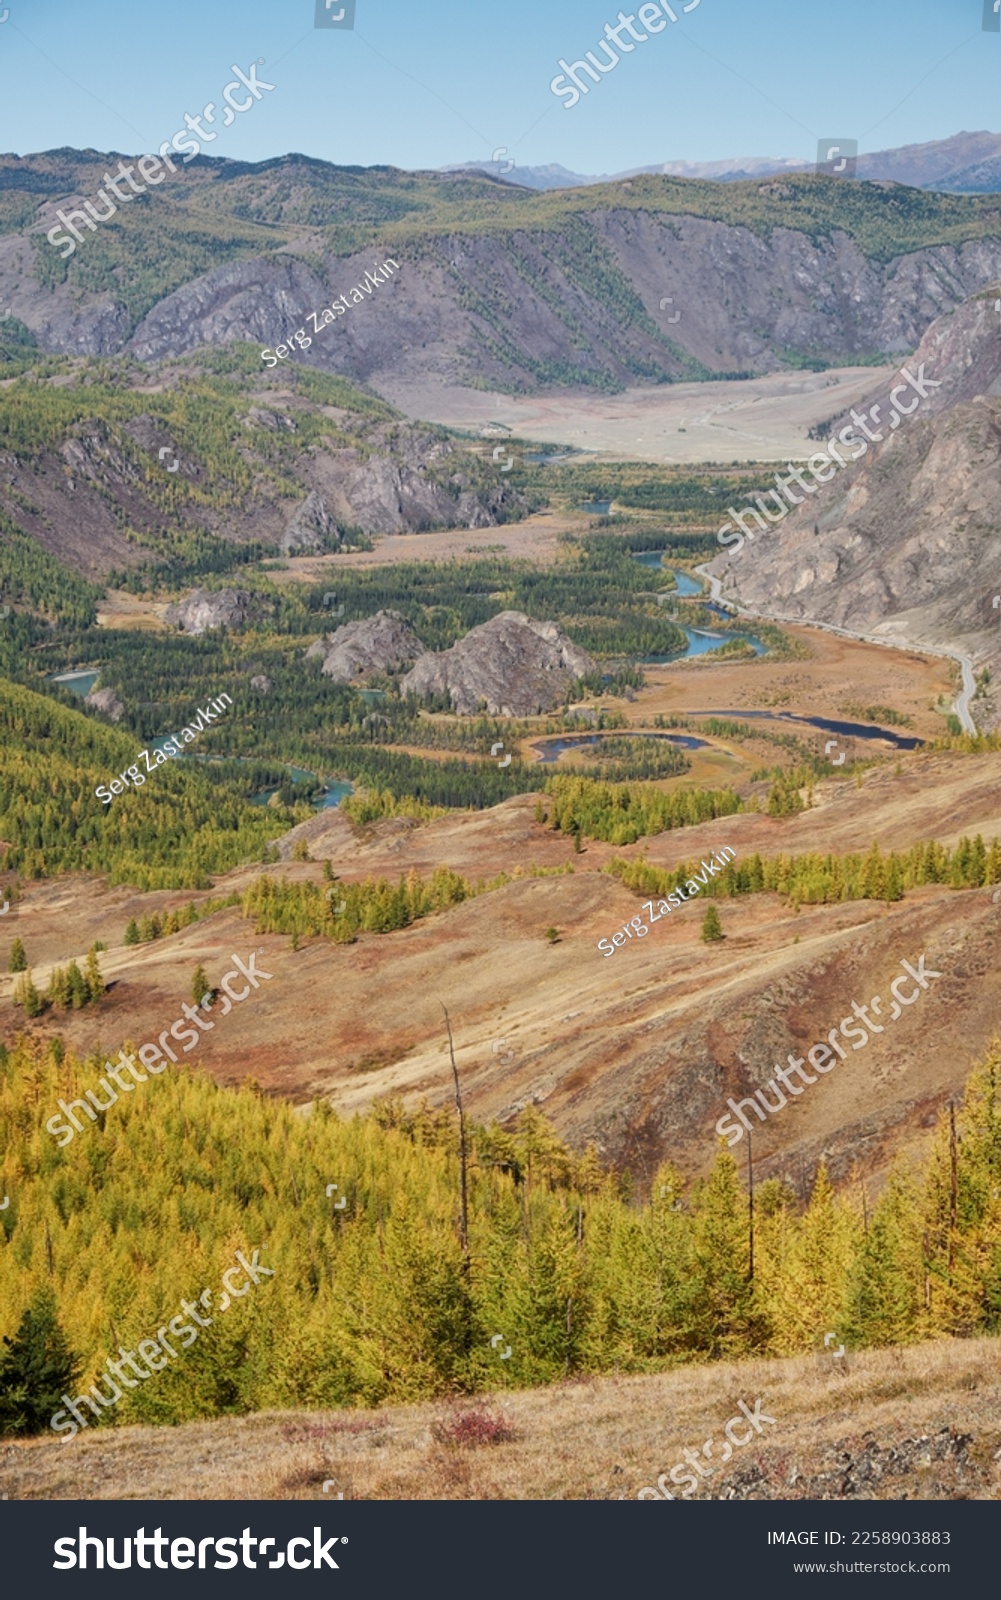 Autumn highland landscape. Altai river Chuya surrounded by mountains. Larch trees in yellow autumn color. Altai, Siberia, Russia. #2258903883